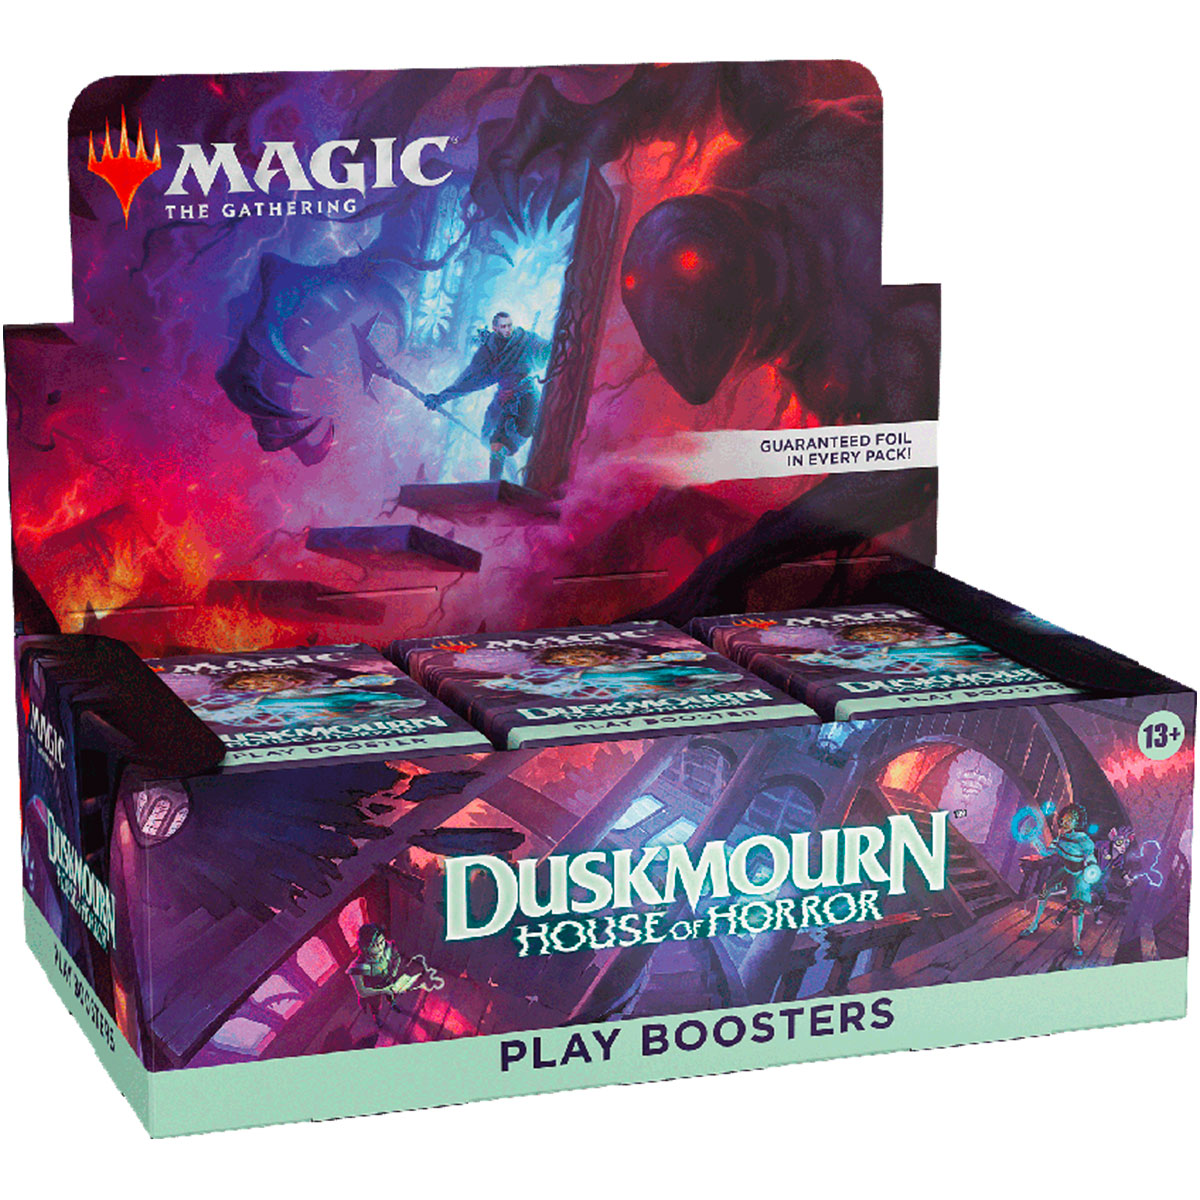 magic the gathering - duskmourn: house of horror - play booster - box 36 buste (eng)